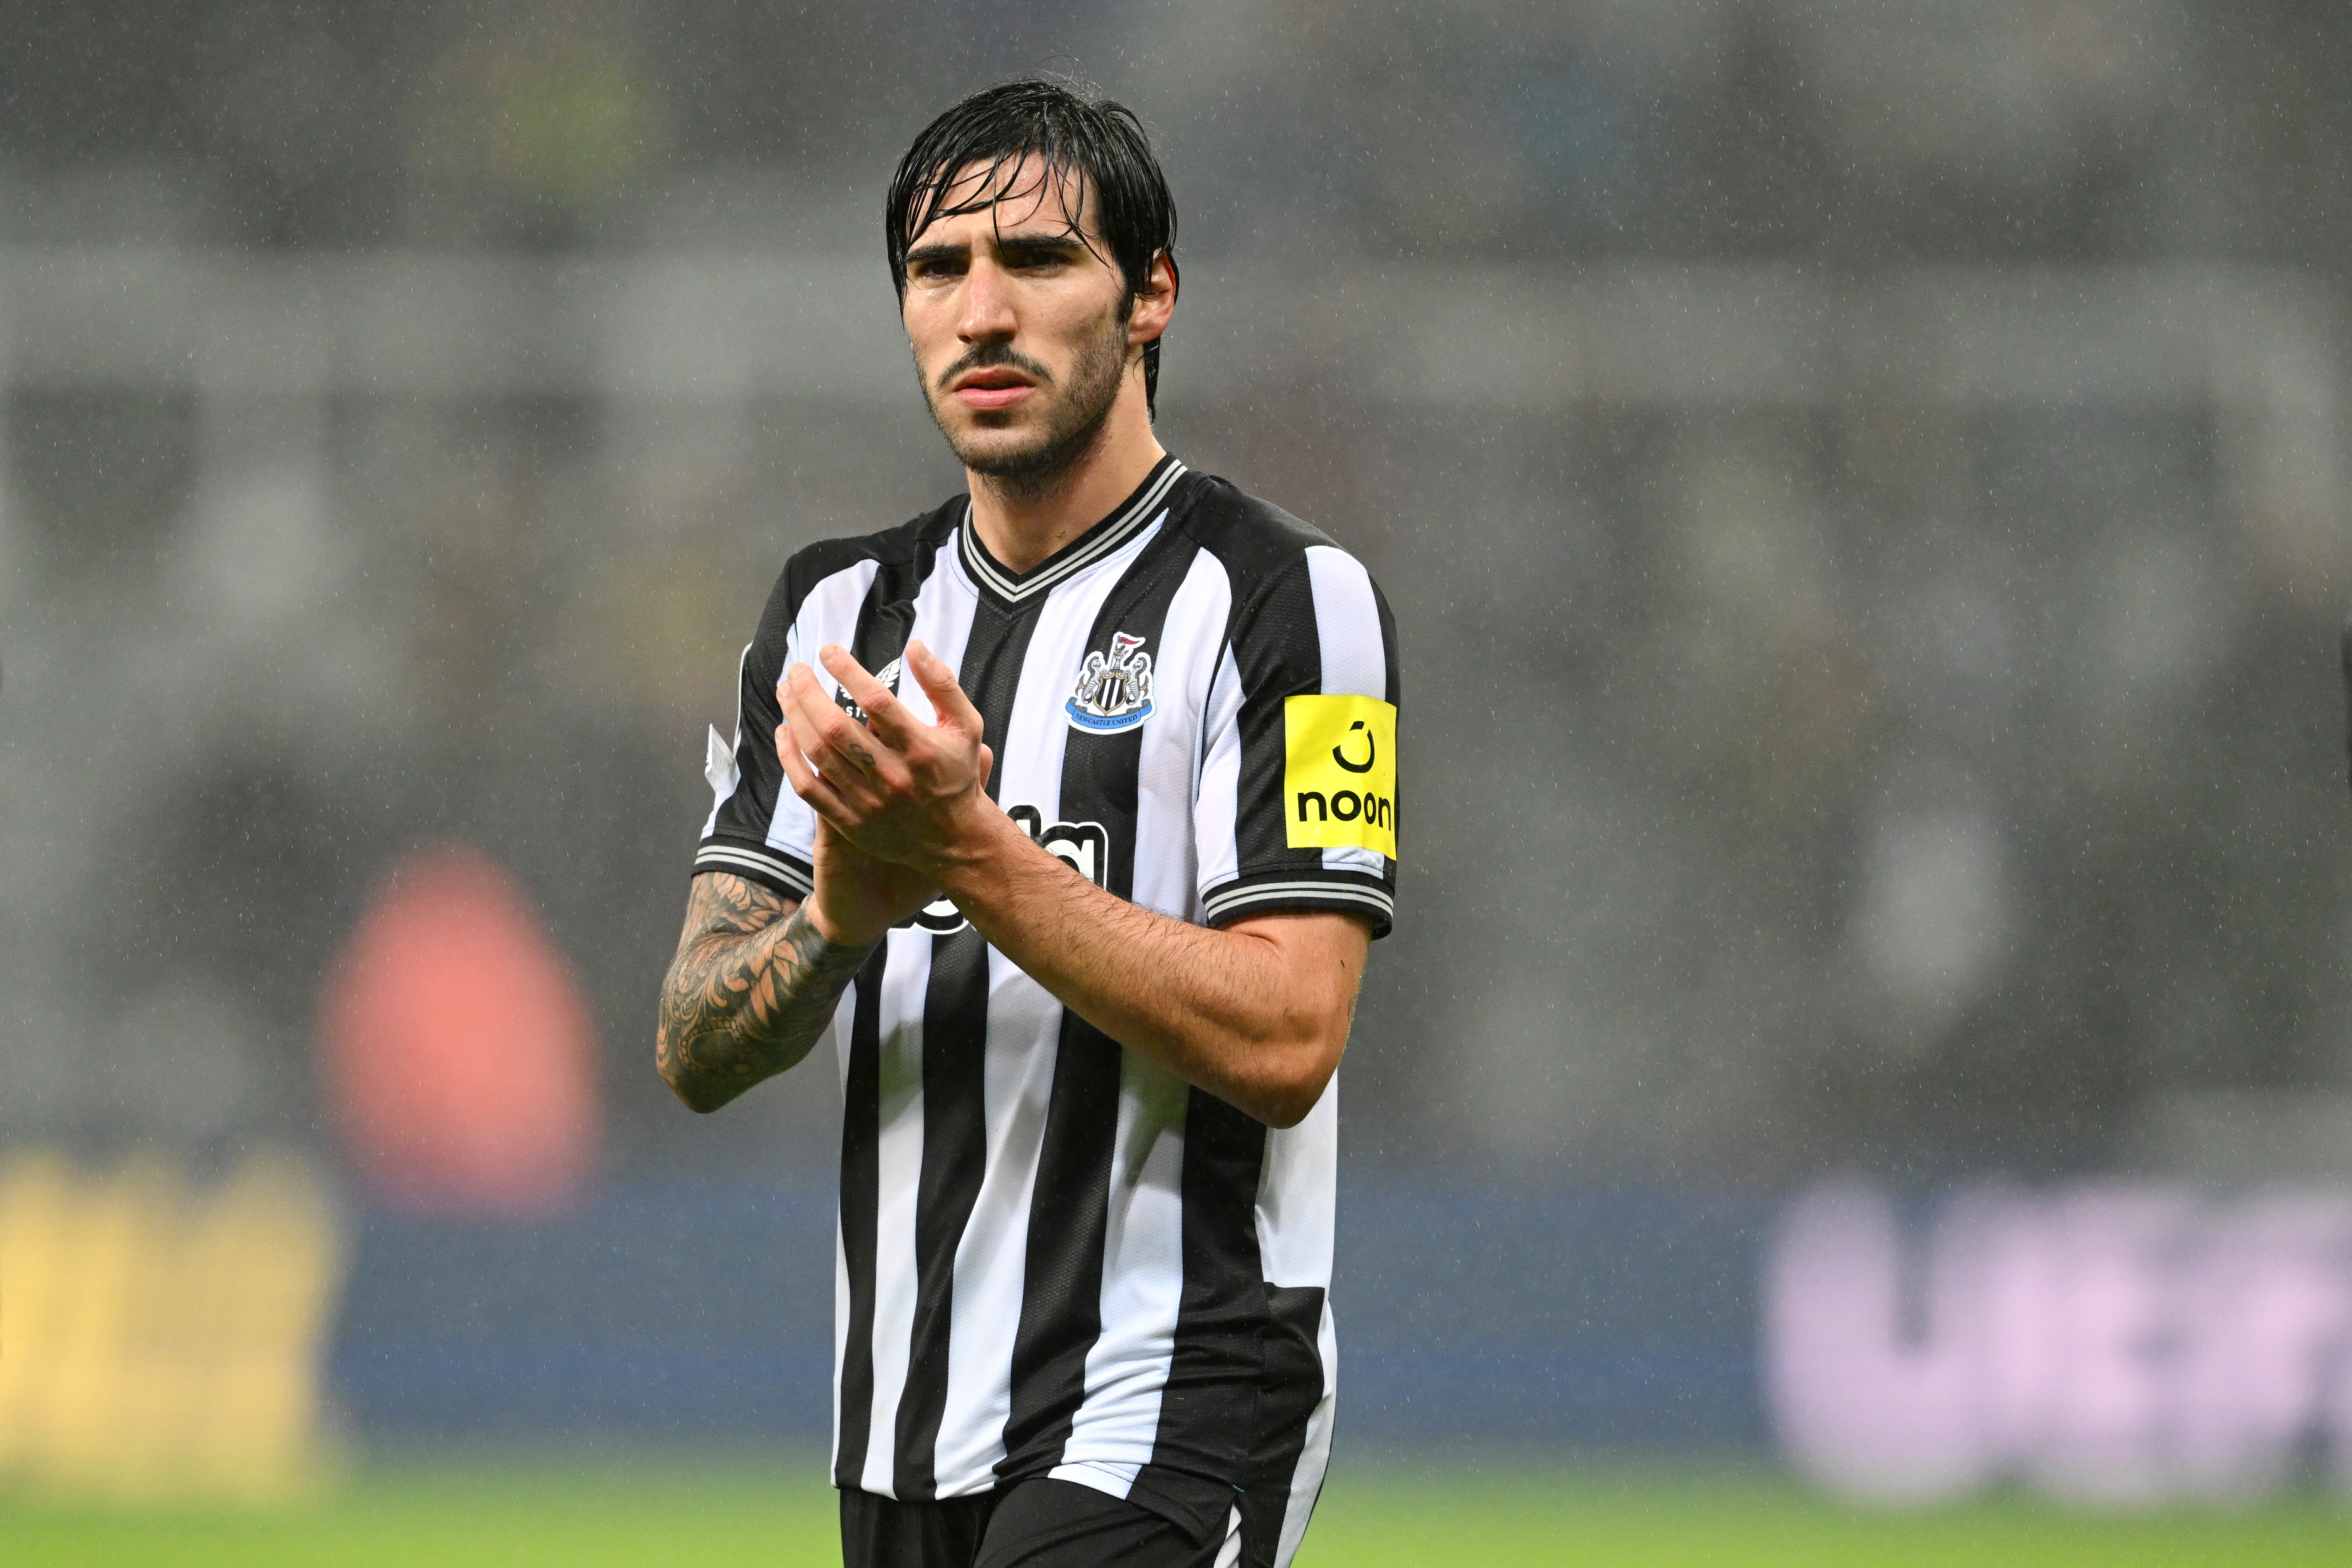 Sandro Tonali was charged by the FA on Thursday after allegedly breaching betting rules while at Newcastle